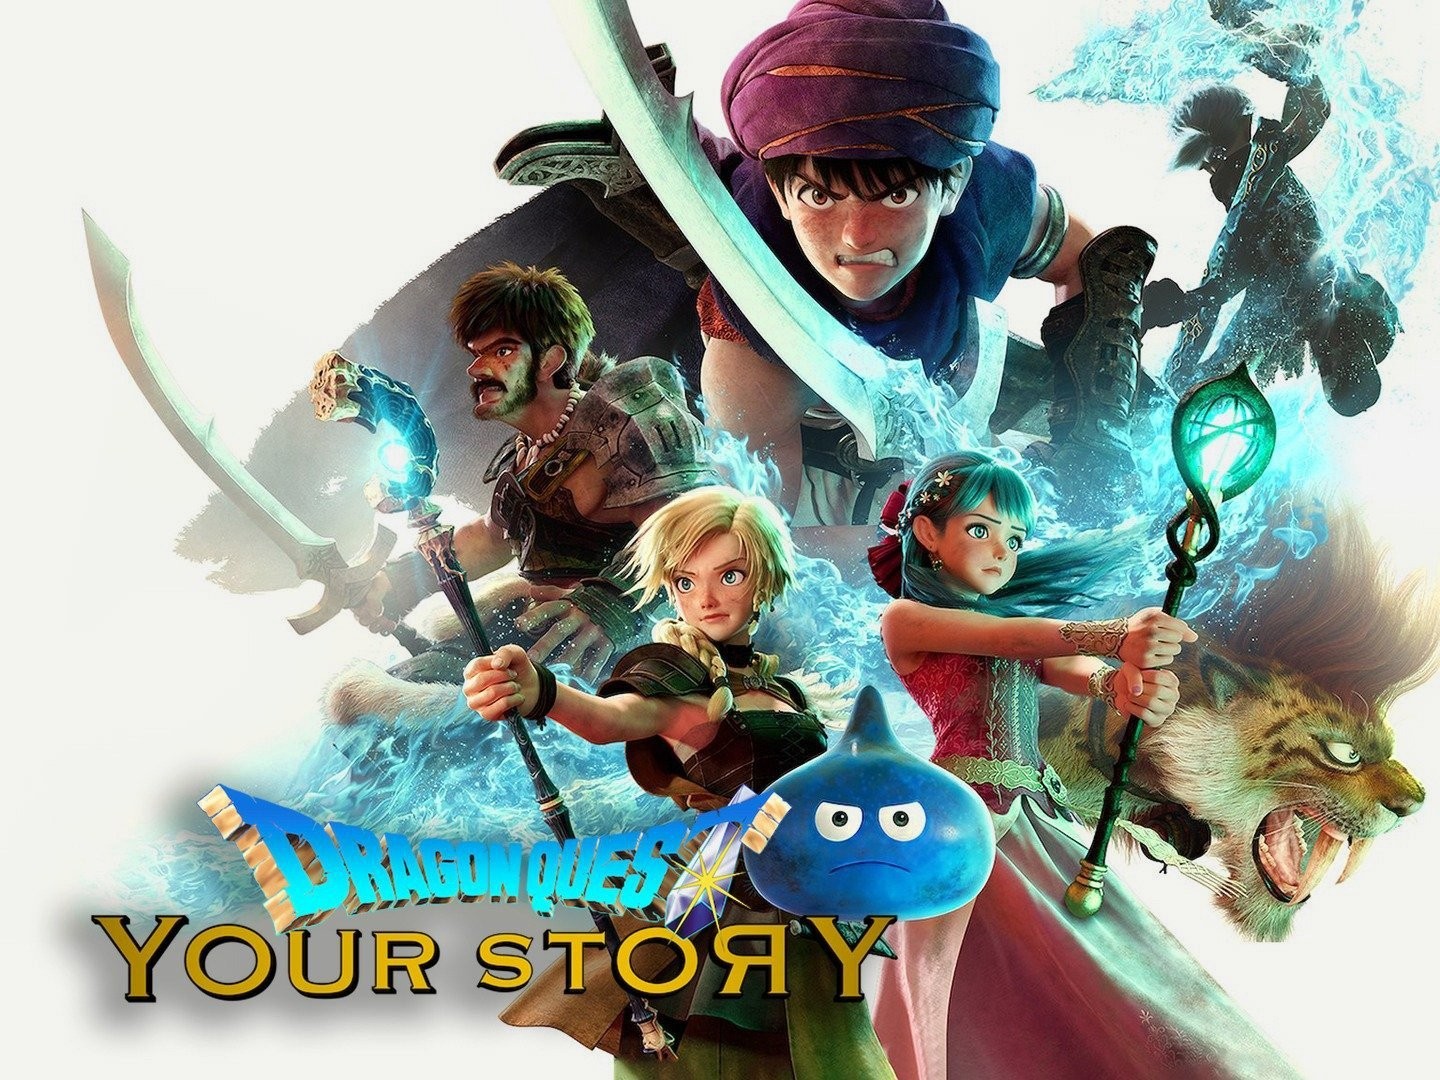 On the Screen: Dragon Quest – Your Story